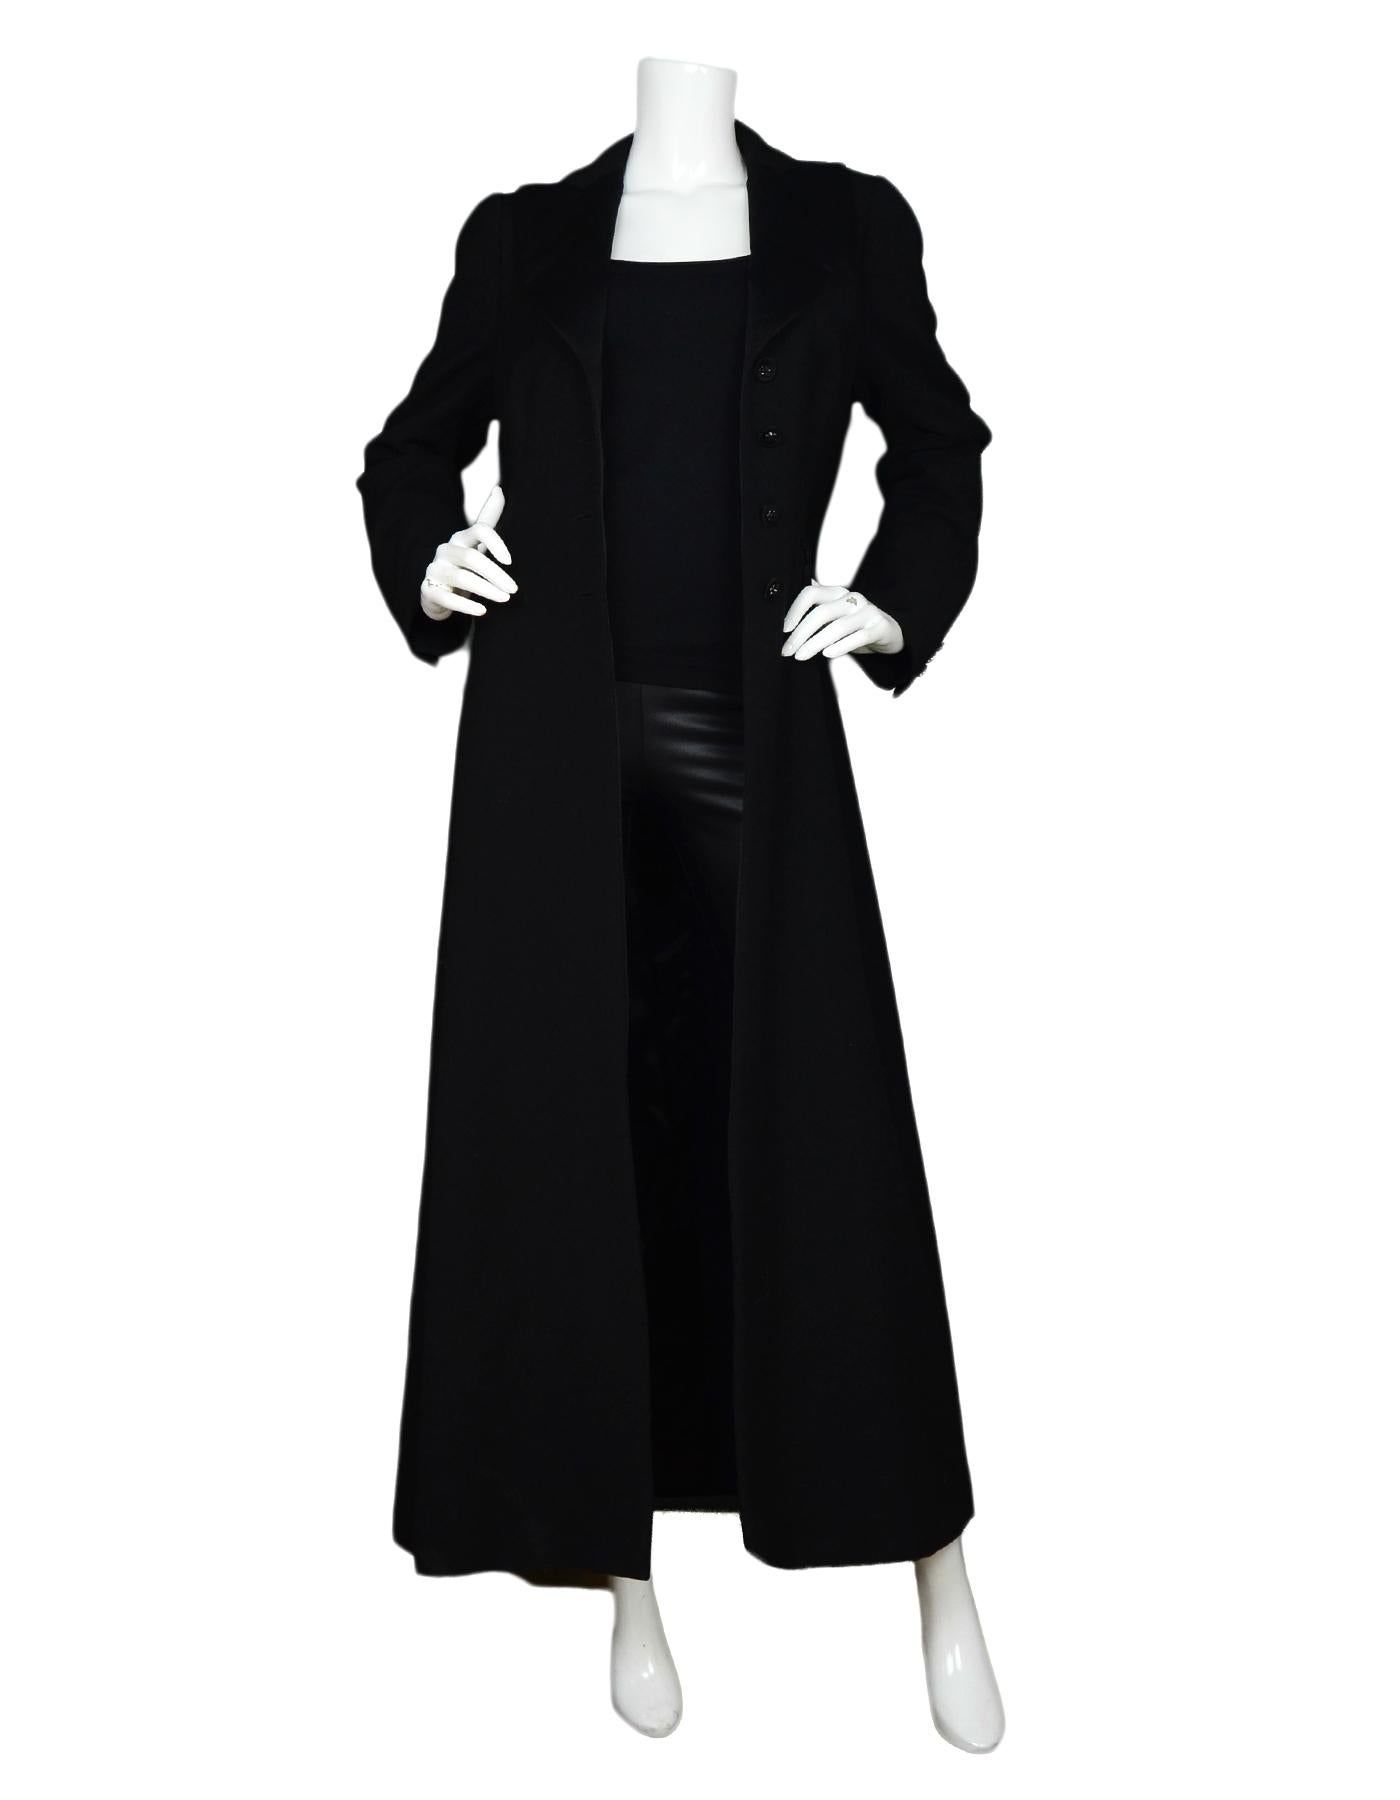 Moschino Black Long Floor Length Tux Style Coat Sz 10

Made In:  Italy
Color: Black
Materials: 10% wool
Lining: 100% rayon
Opening/Closure: Button front
Overall Condition: Excellent pre-owned condition 

Measurements: 
Shoulder To Shoulder: